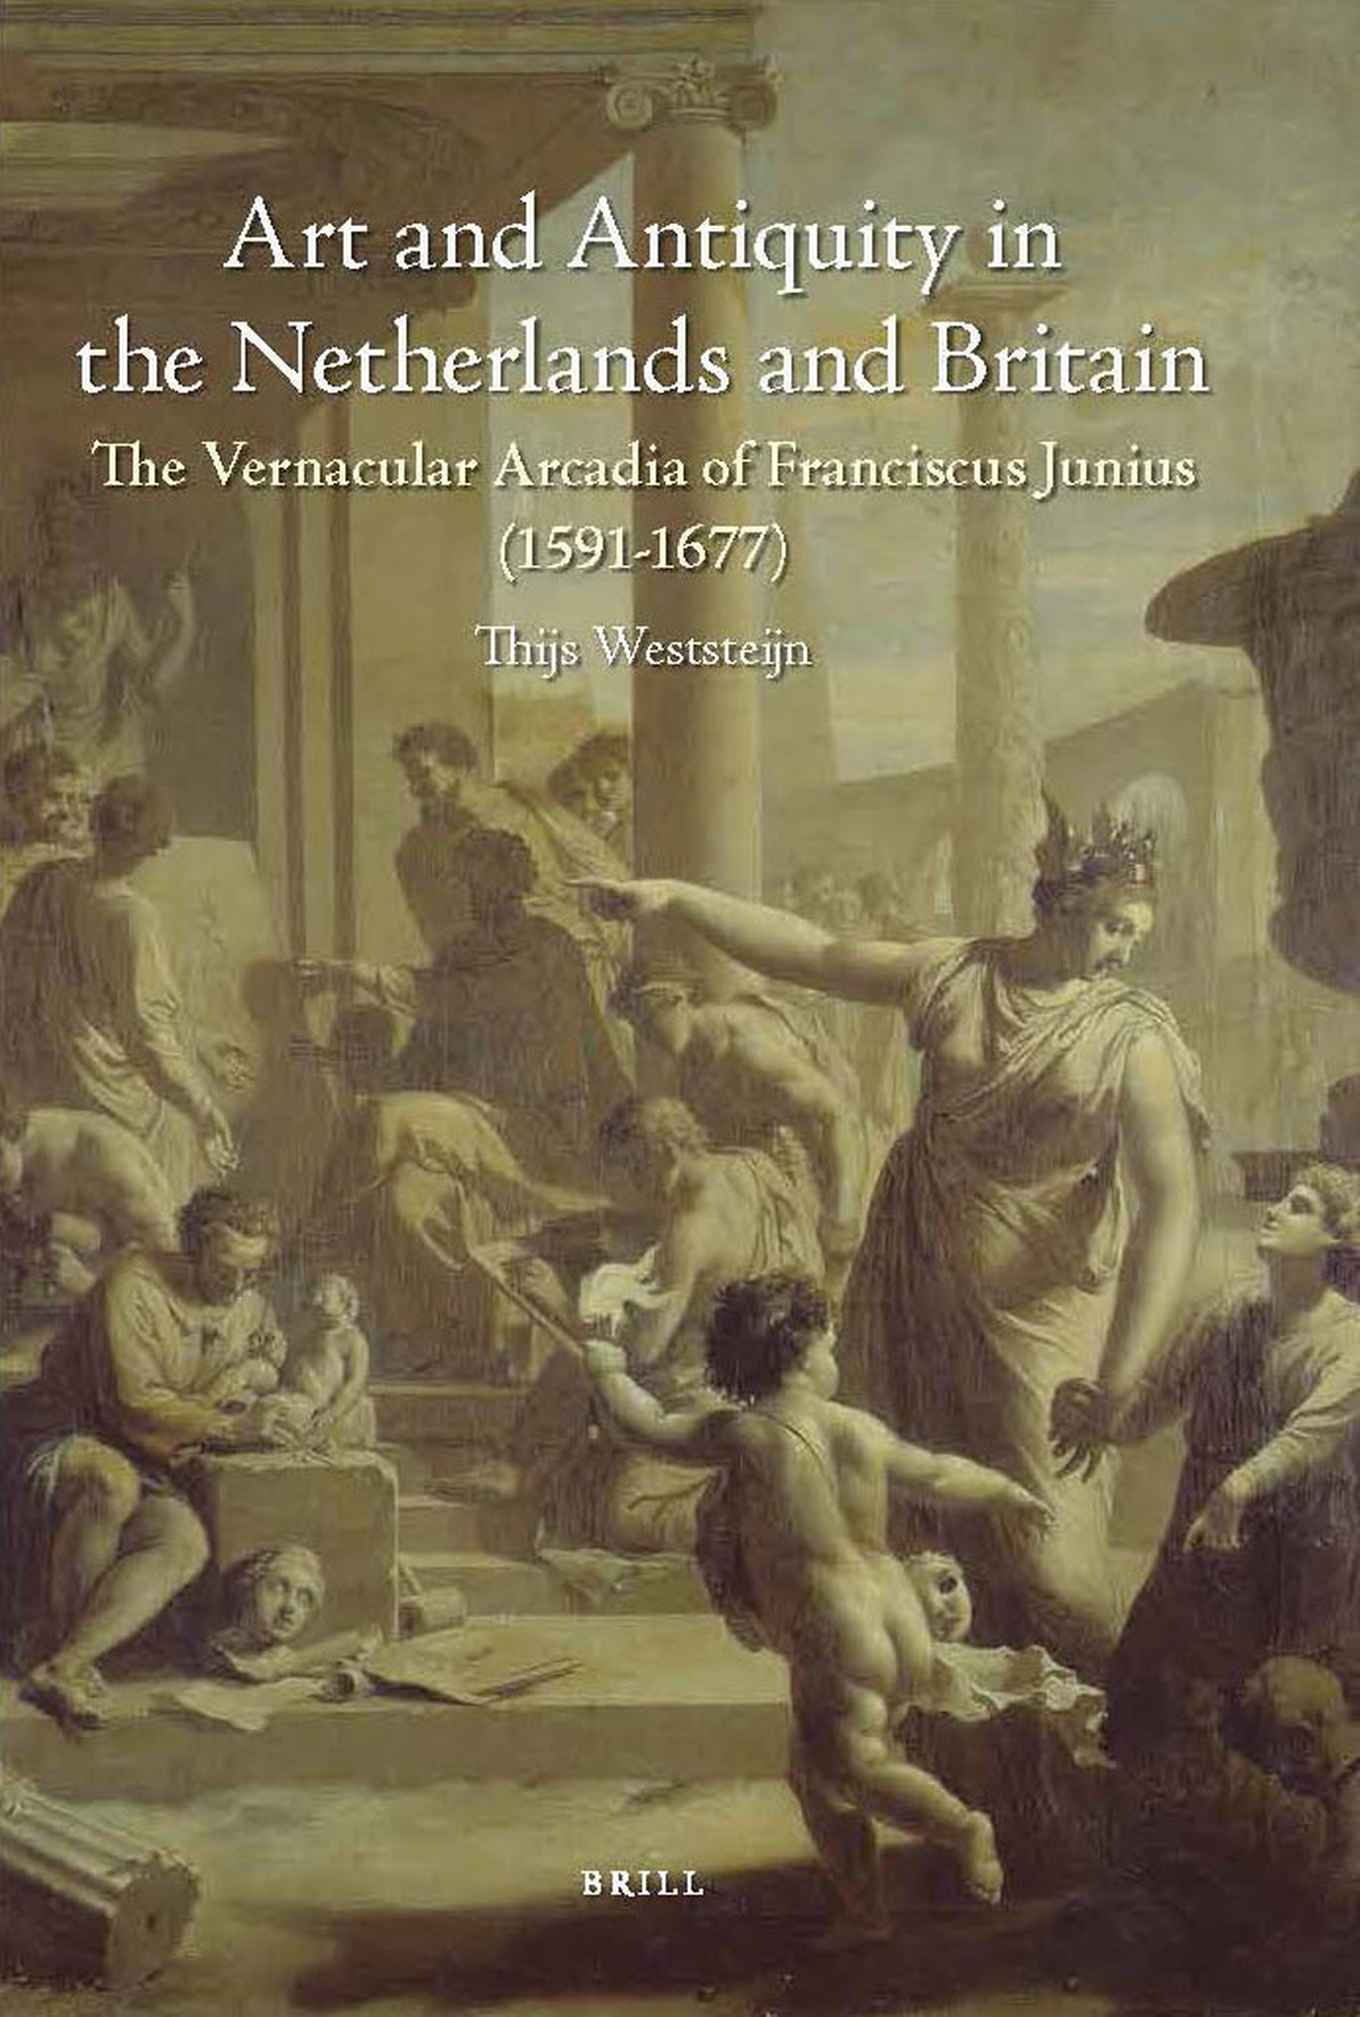 Art and Antiquity in the Netherlands and Britain